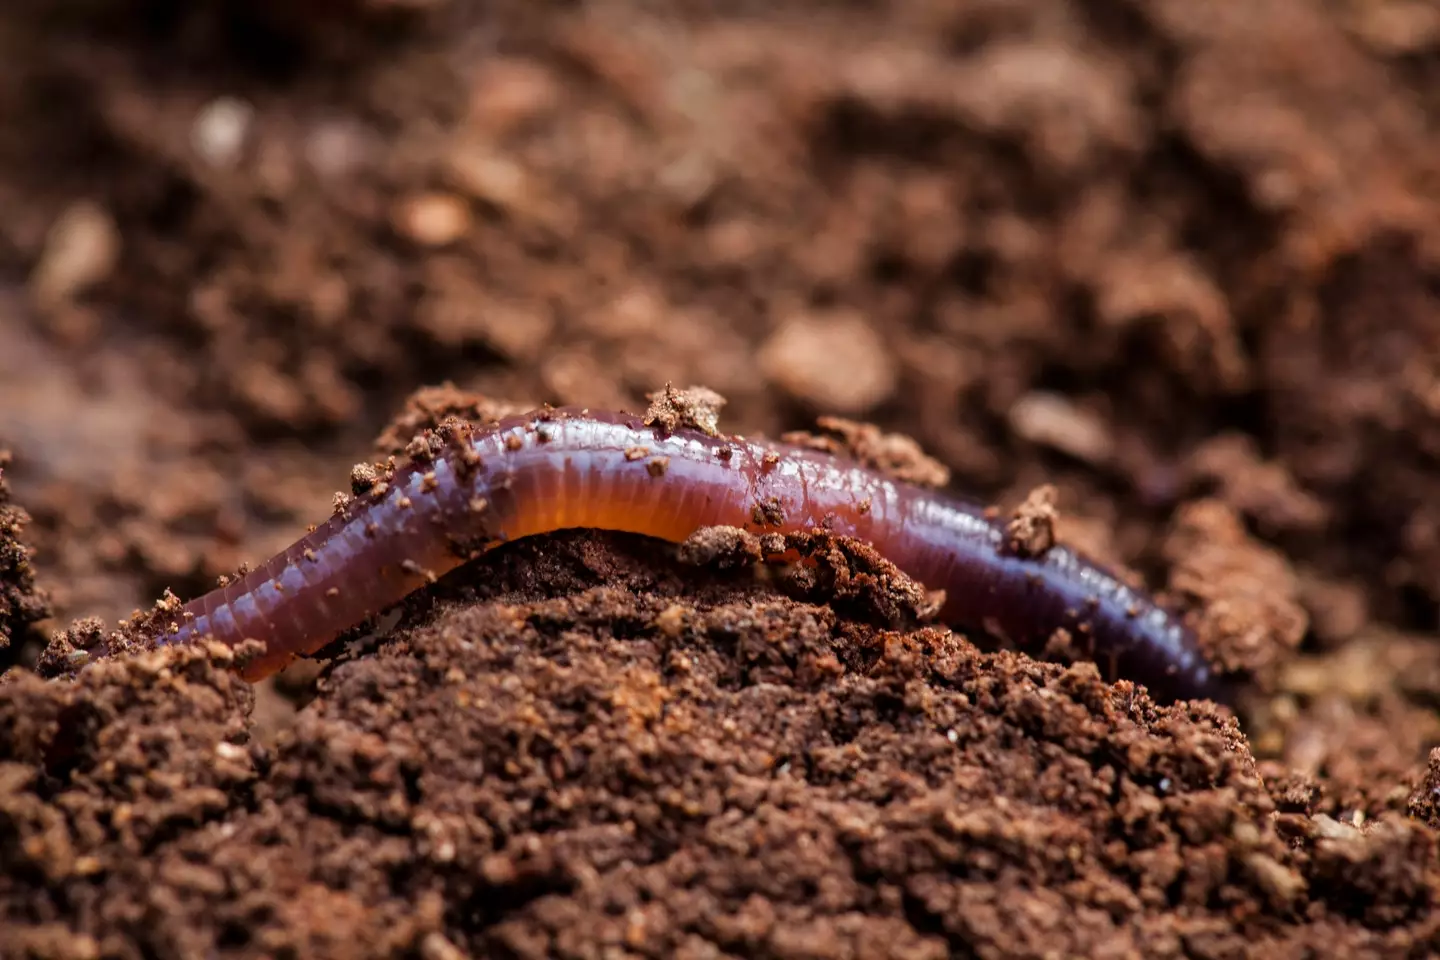 Scientists have strengthened the Piwi-piRNA pathway in a worm. (Getty Stock Image)